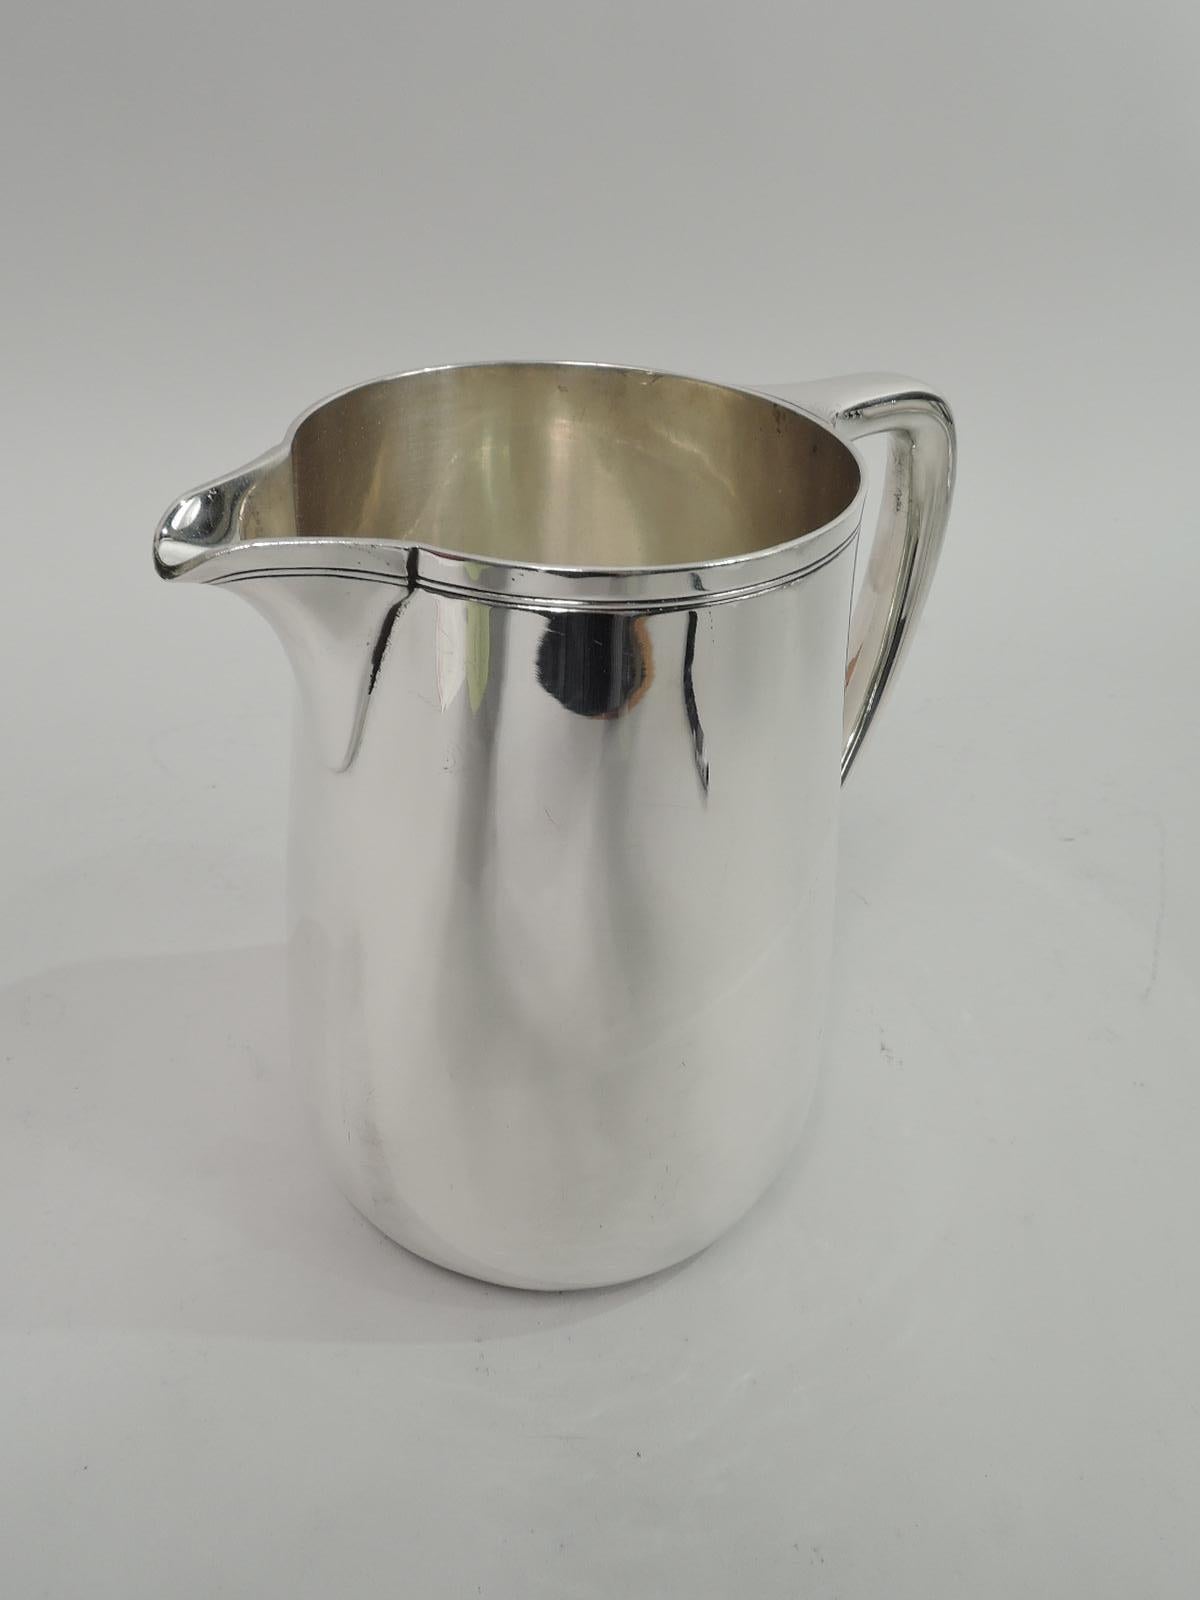 Modern sterling silver water pitcher. Made by Tiffany & Co. in New York. Upward tapering sides, scrolled bracket handle, and v-spout. Spare incised banding near rim. Holds 3 1/2 pints. Fully marked including maker’s stamp, pattern no. 22343,